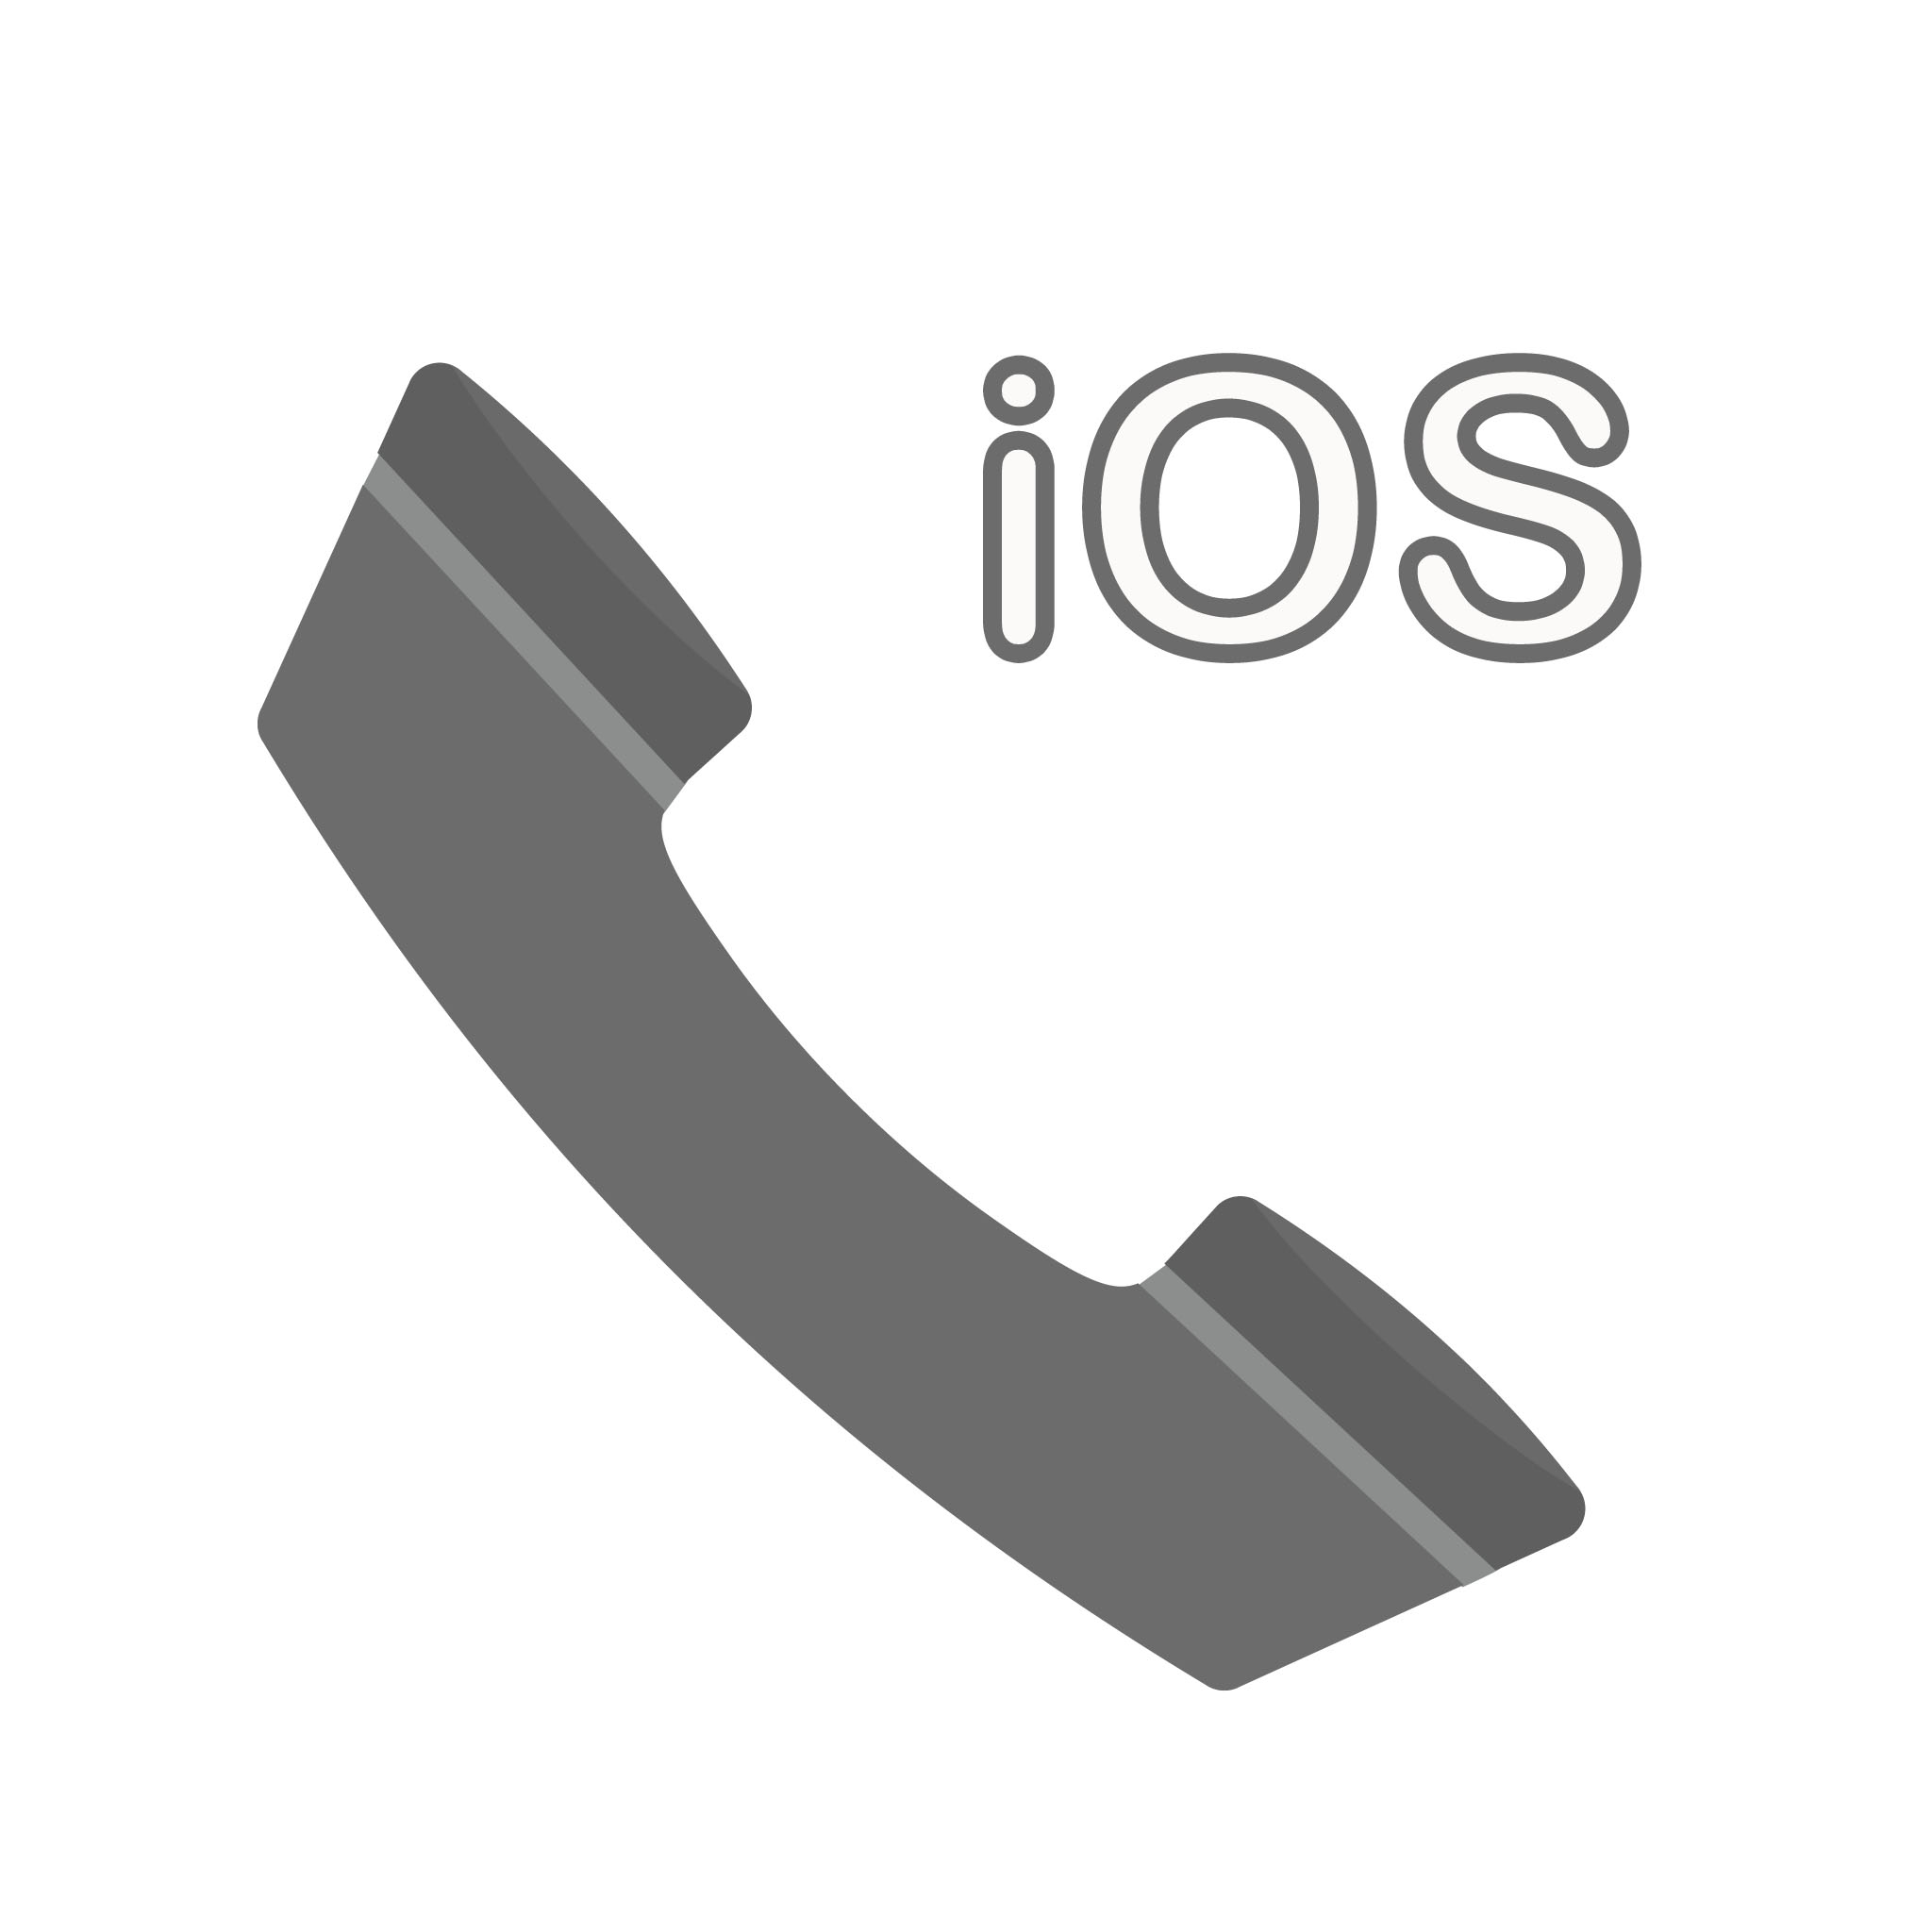 spam calls on ios icon